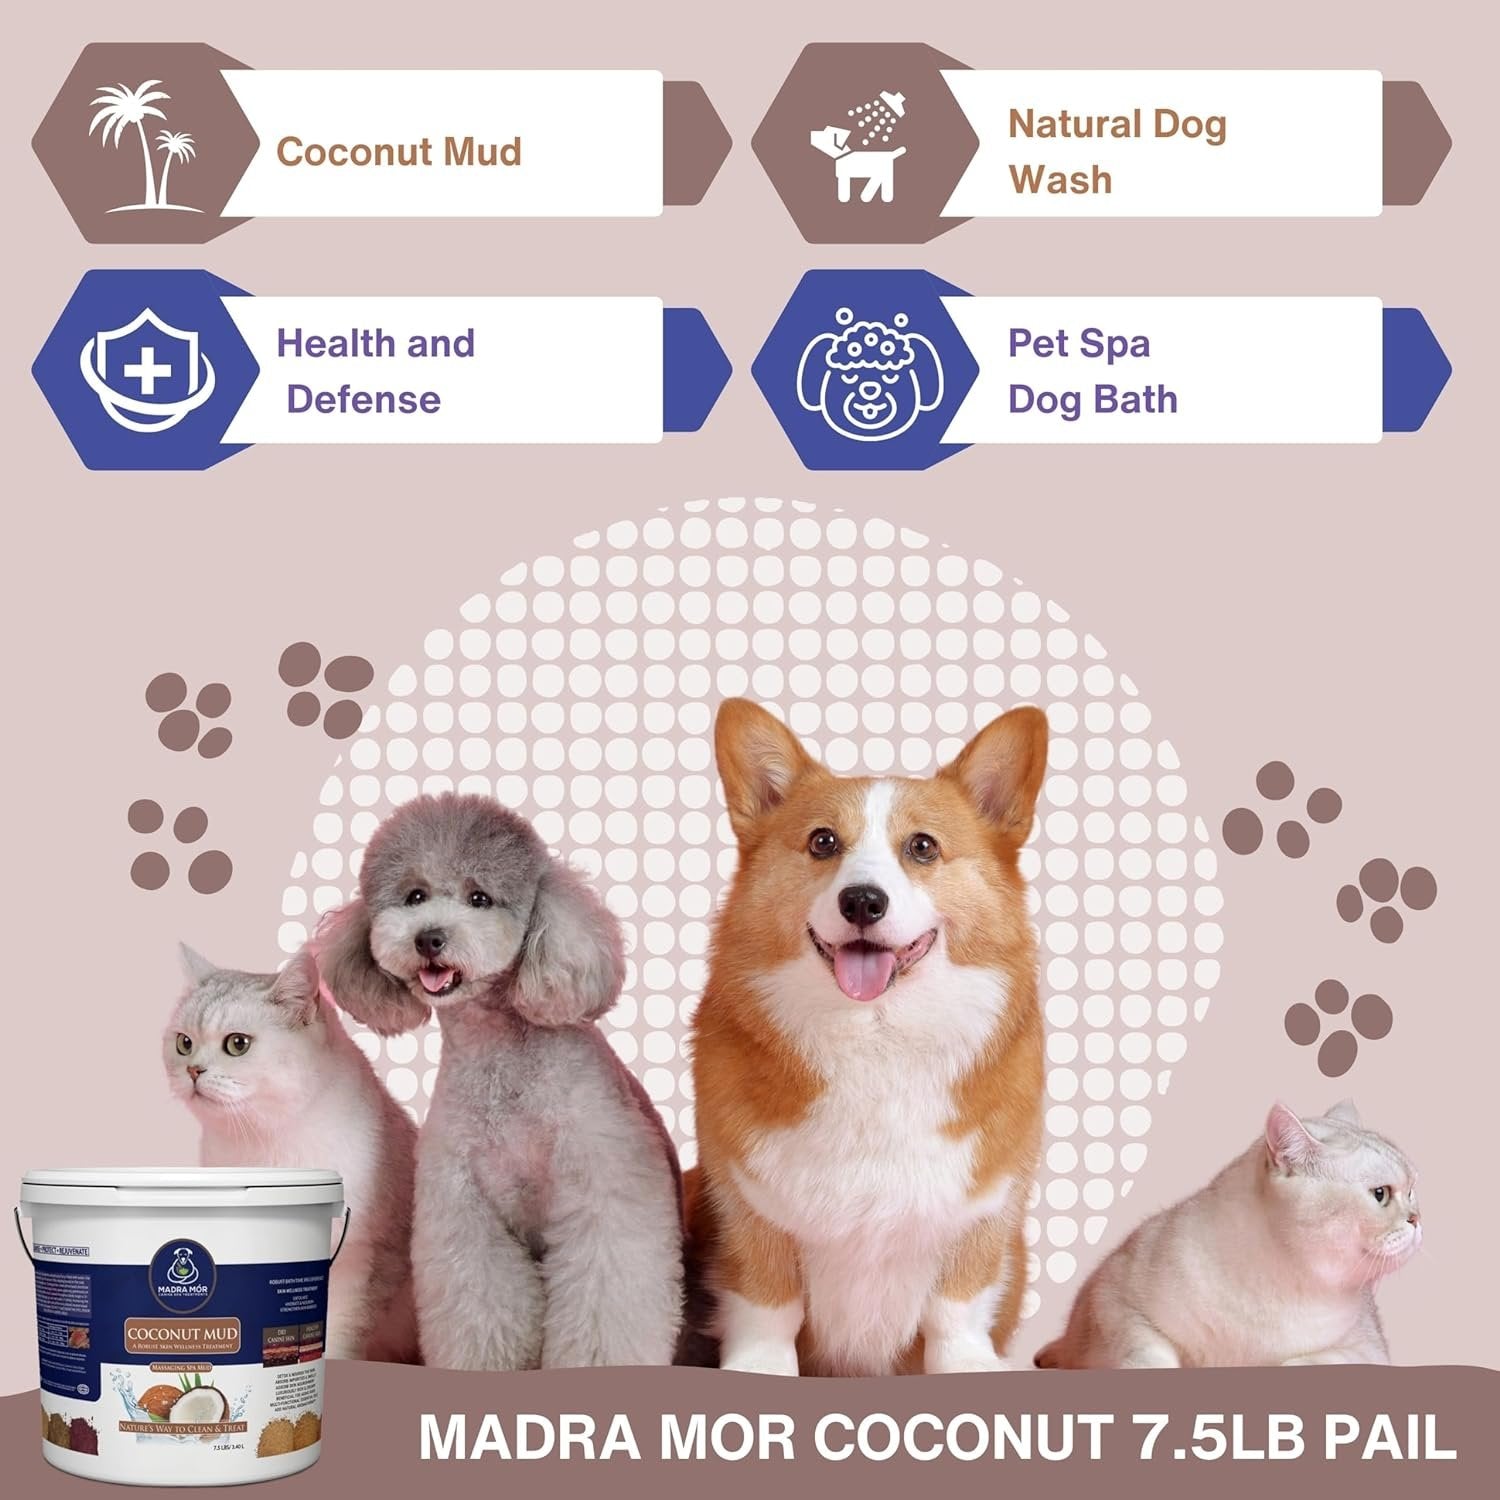 Madra Mor - Coconut Mud Massaging Spa Bath for Dogs - Skin Care, Grooming - 1 Pail of 7.5 lb - with Multi-Purpose Keychain